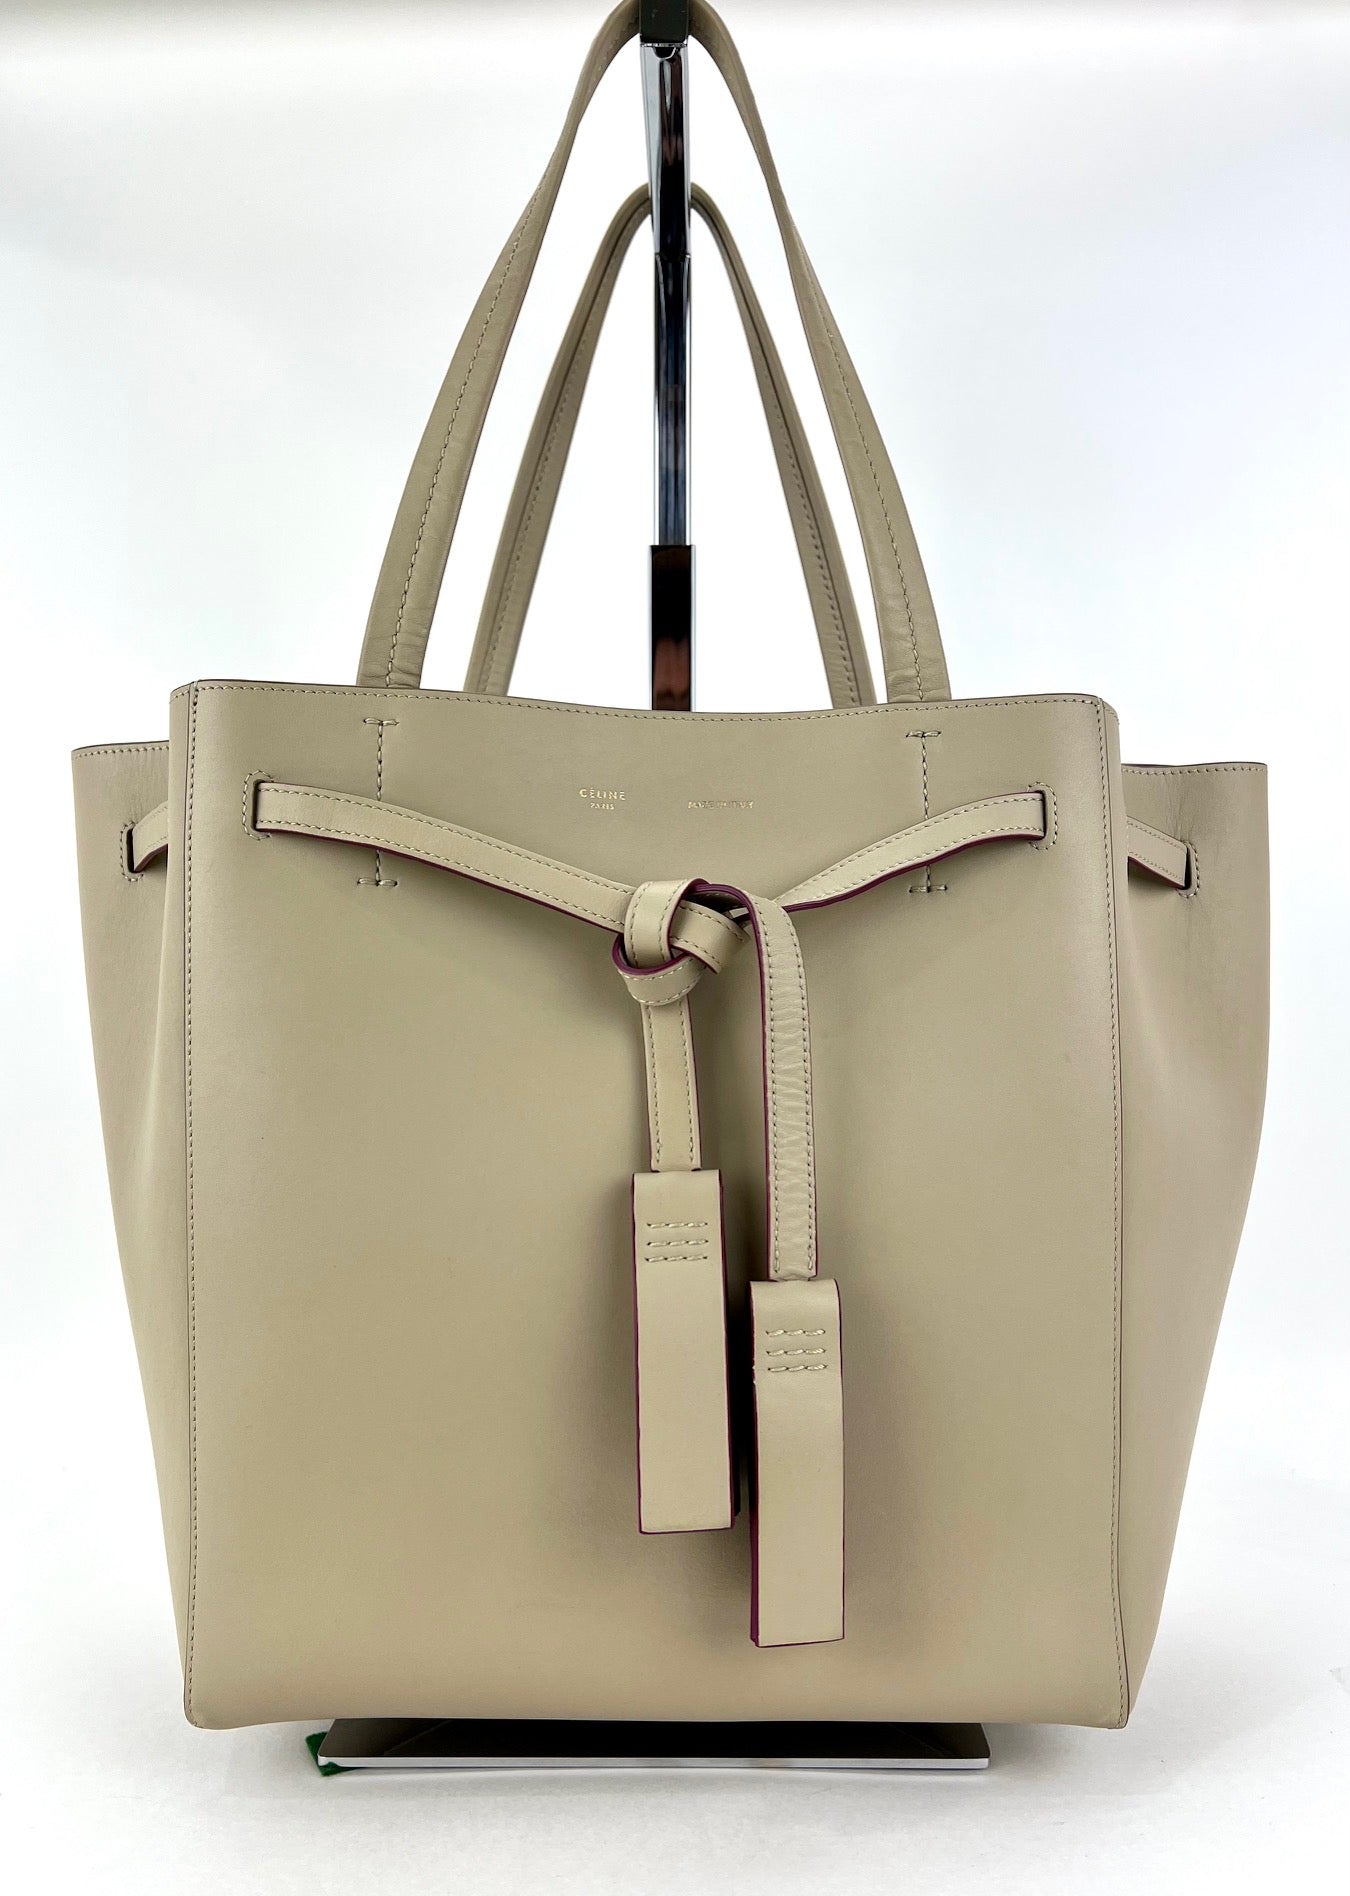 Celine Small Cabas Phantom in Pabbled Calfskin Leather Tote Bag $1850+TAX